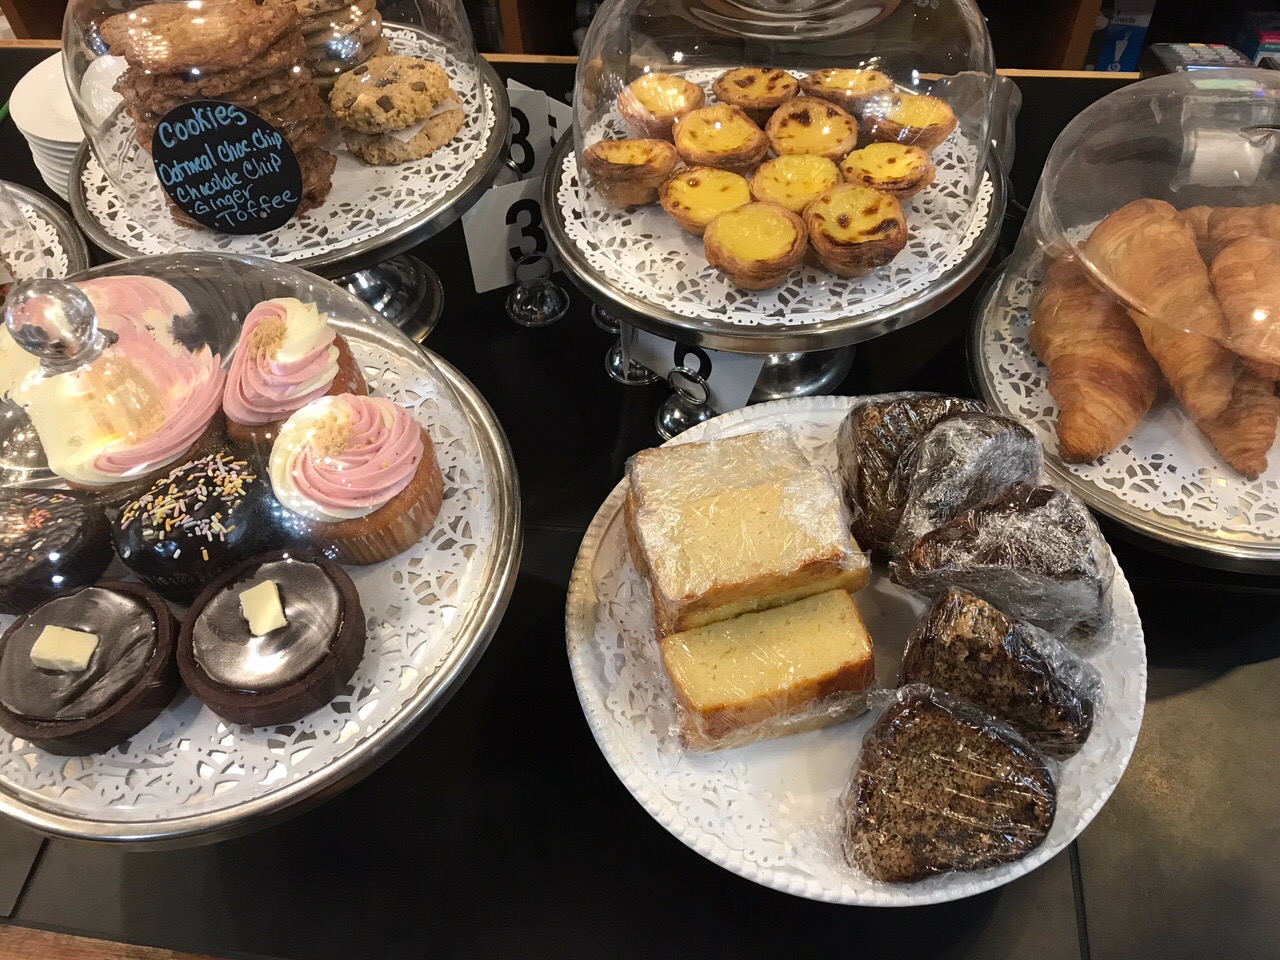 A table displaying a selection of baked goods